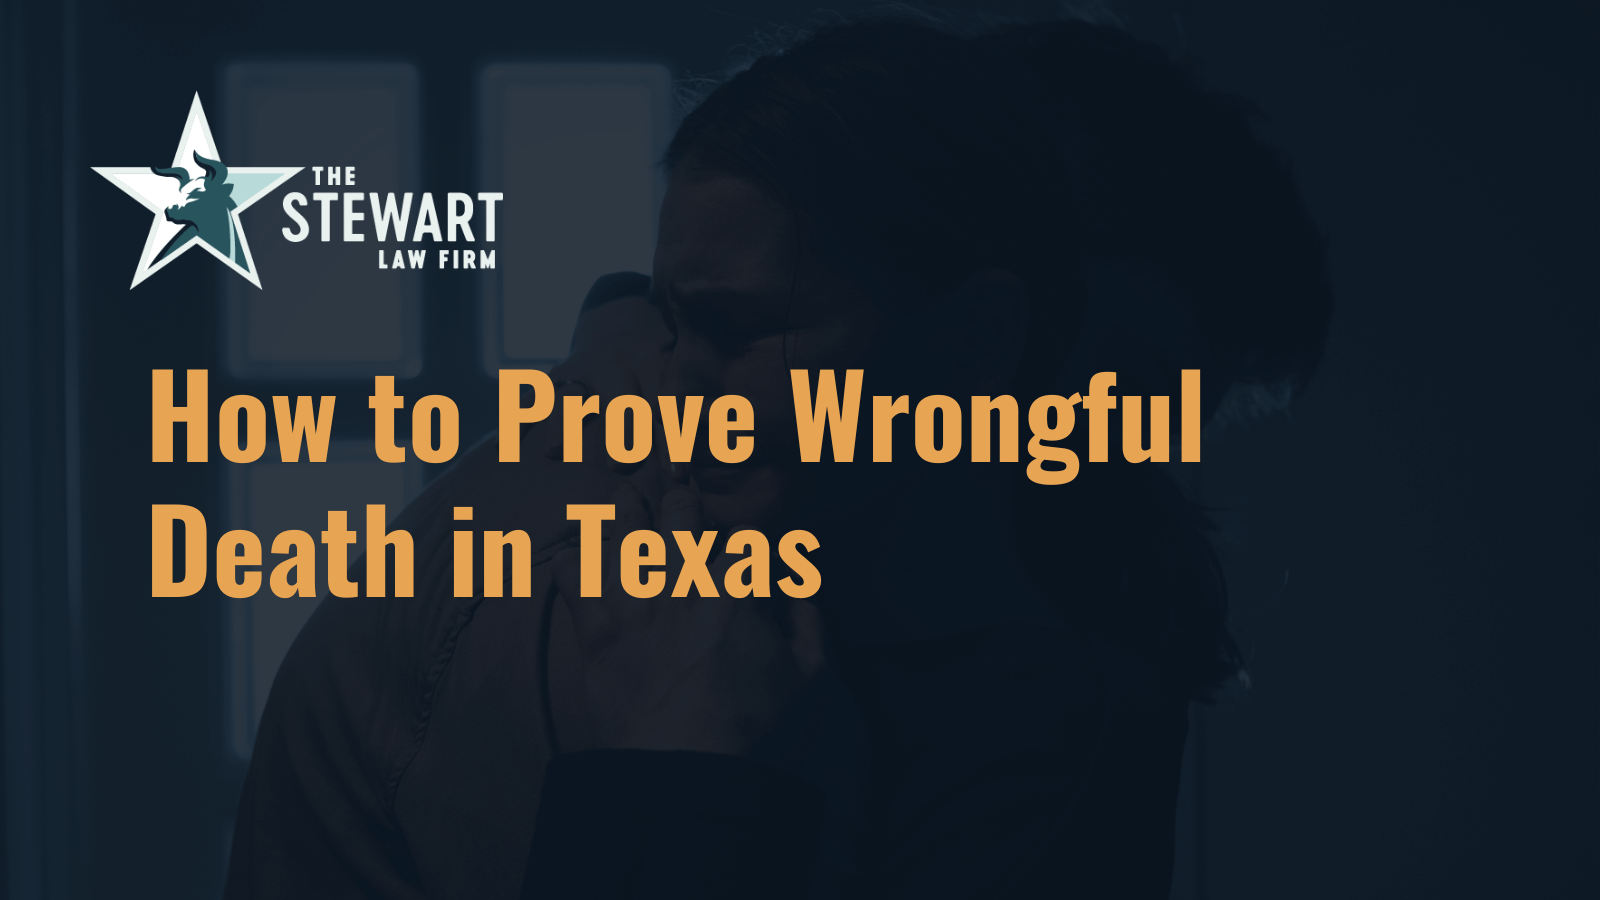 How to Prove Wrongful Death in Texas - the stephen stewart law firm - austin texas personal injury lawyer